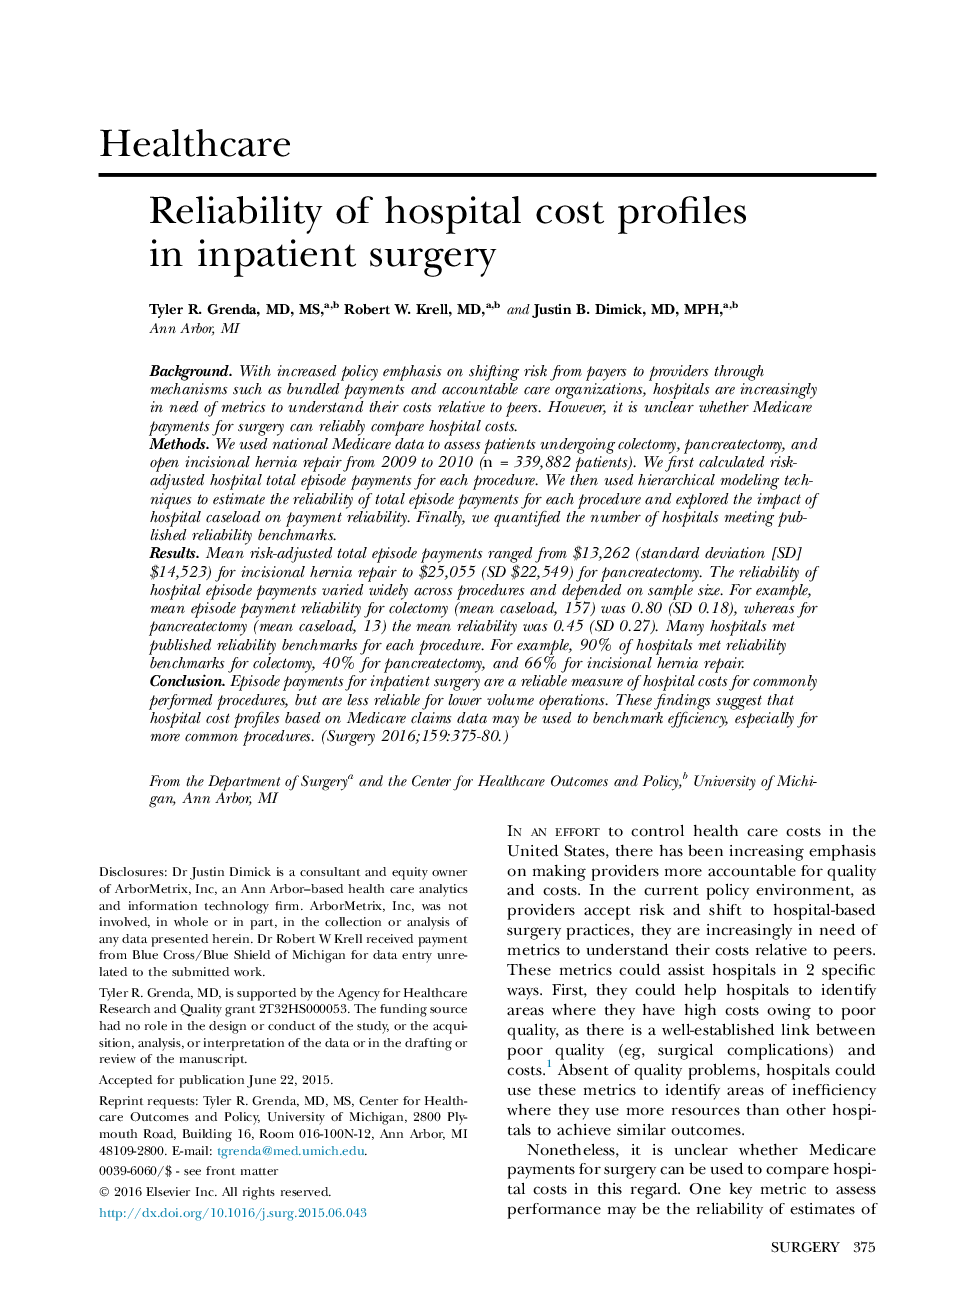 Reliability of hospital cost profiles in inpatient surgery 